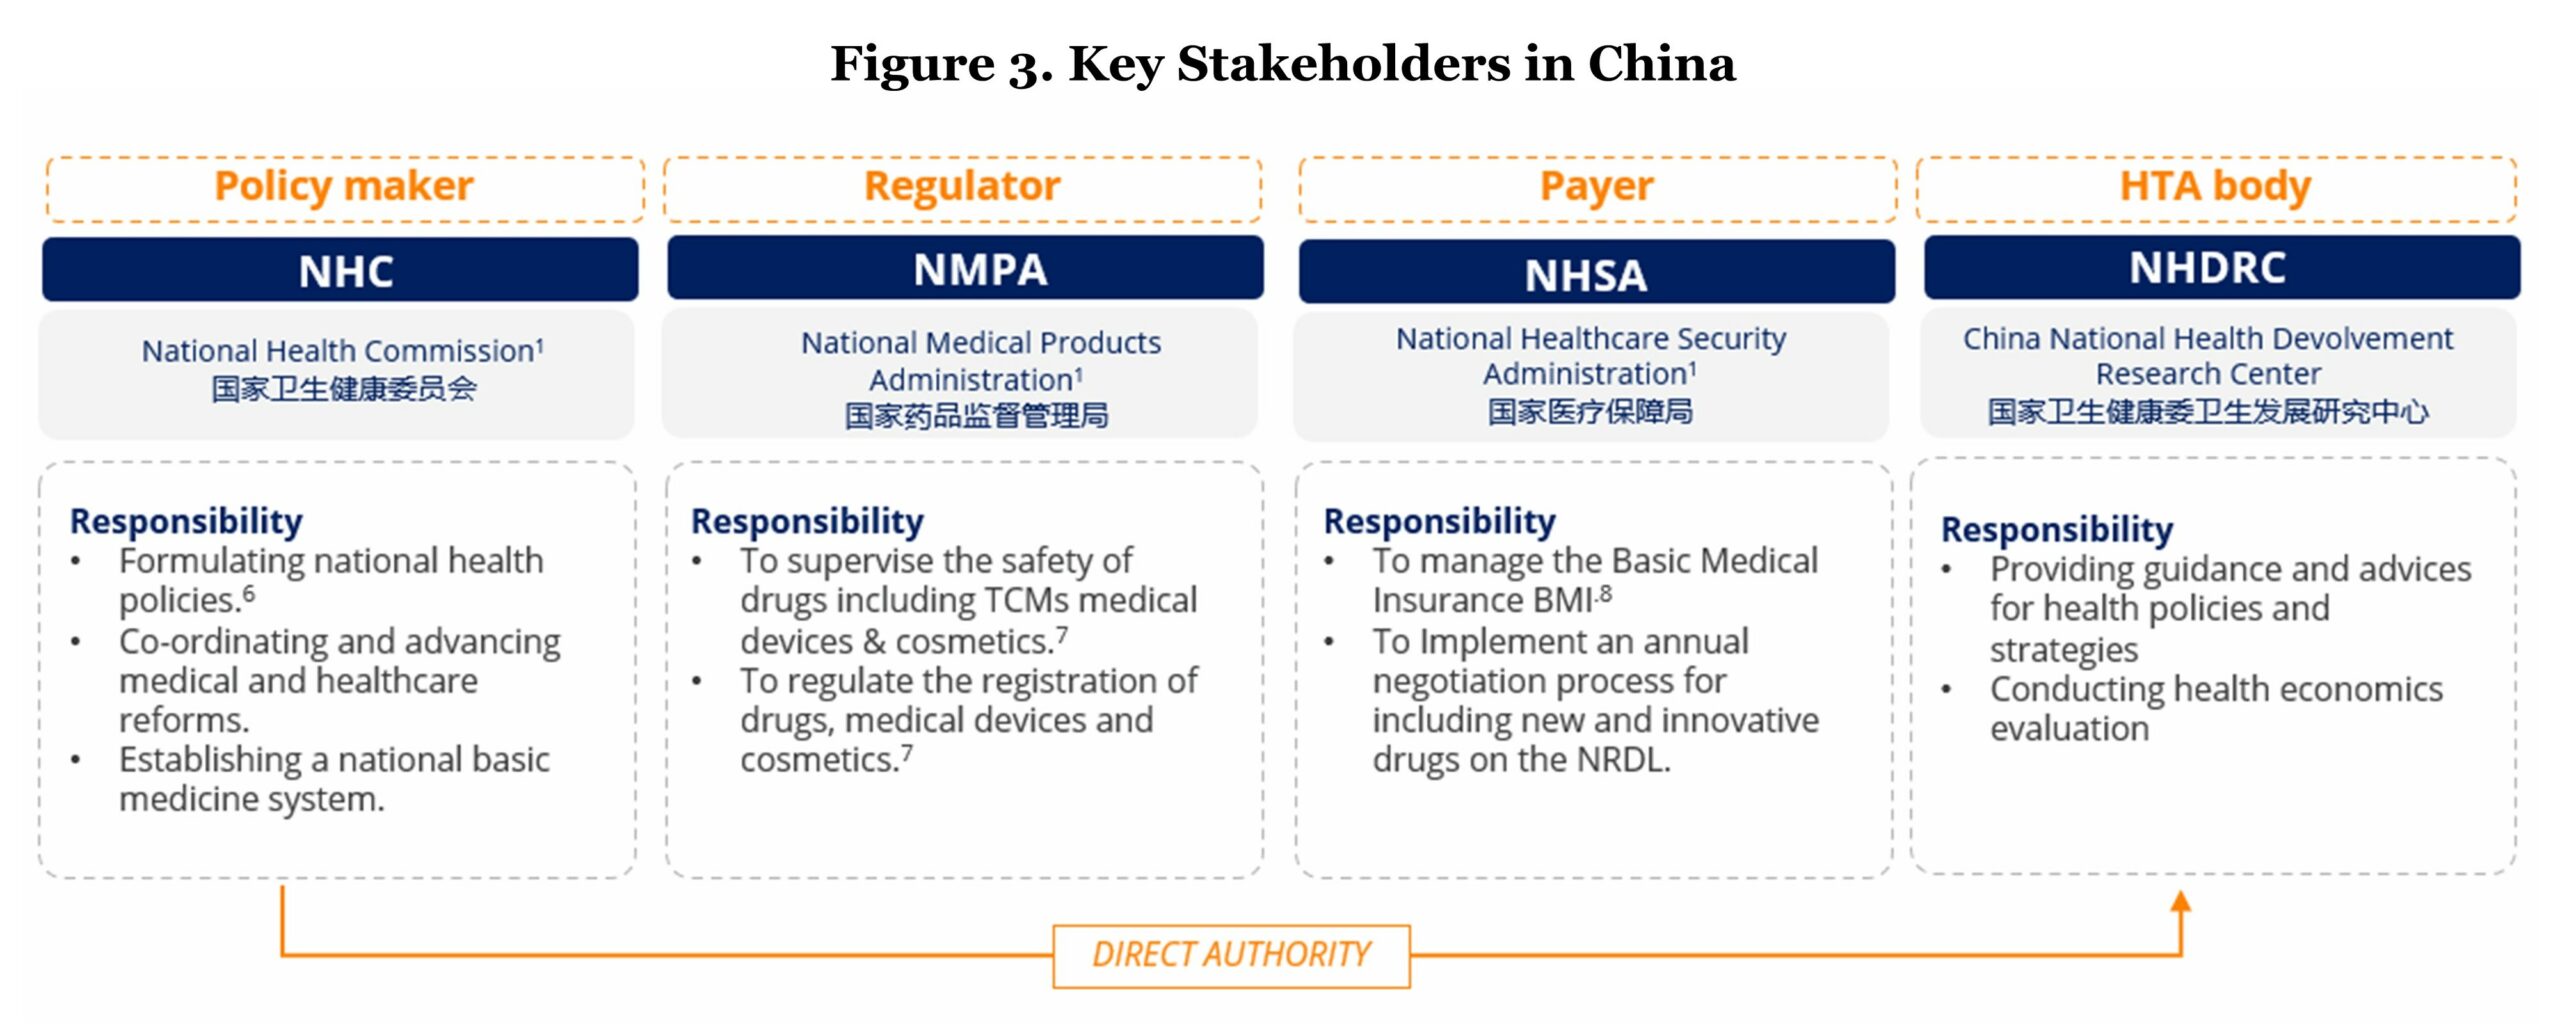 Figure 3. Key Stakeholders in China lists 4 sections, including Policy makers like the National Health Commission (NHC); Regulators like the National Medical Products Administration (NMPA); Payers like the National Healthcare Security Administration (NHSA); and HTA bodies like the China National Health Development Research Center (NHDRC)